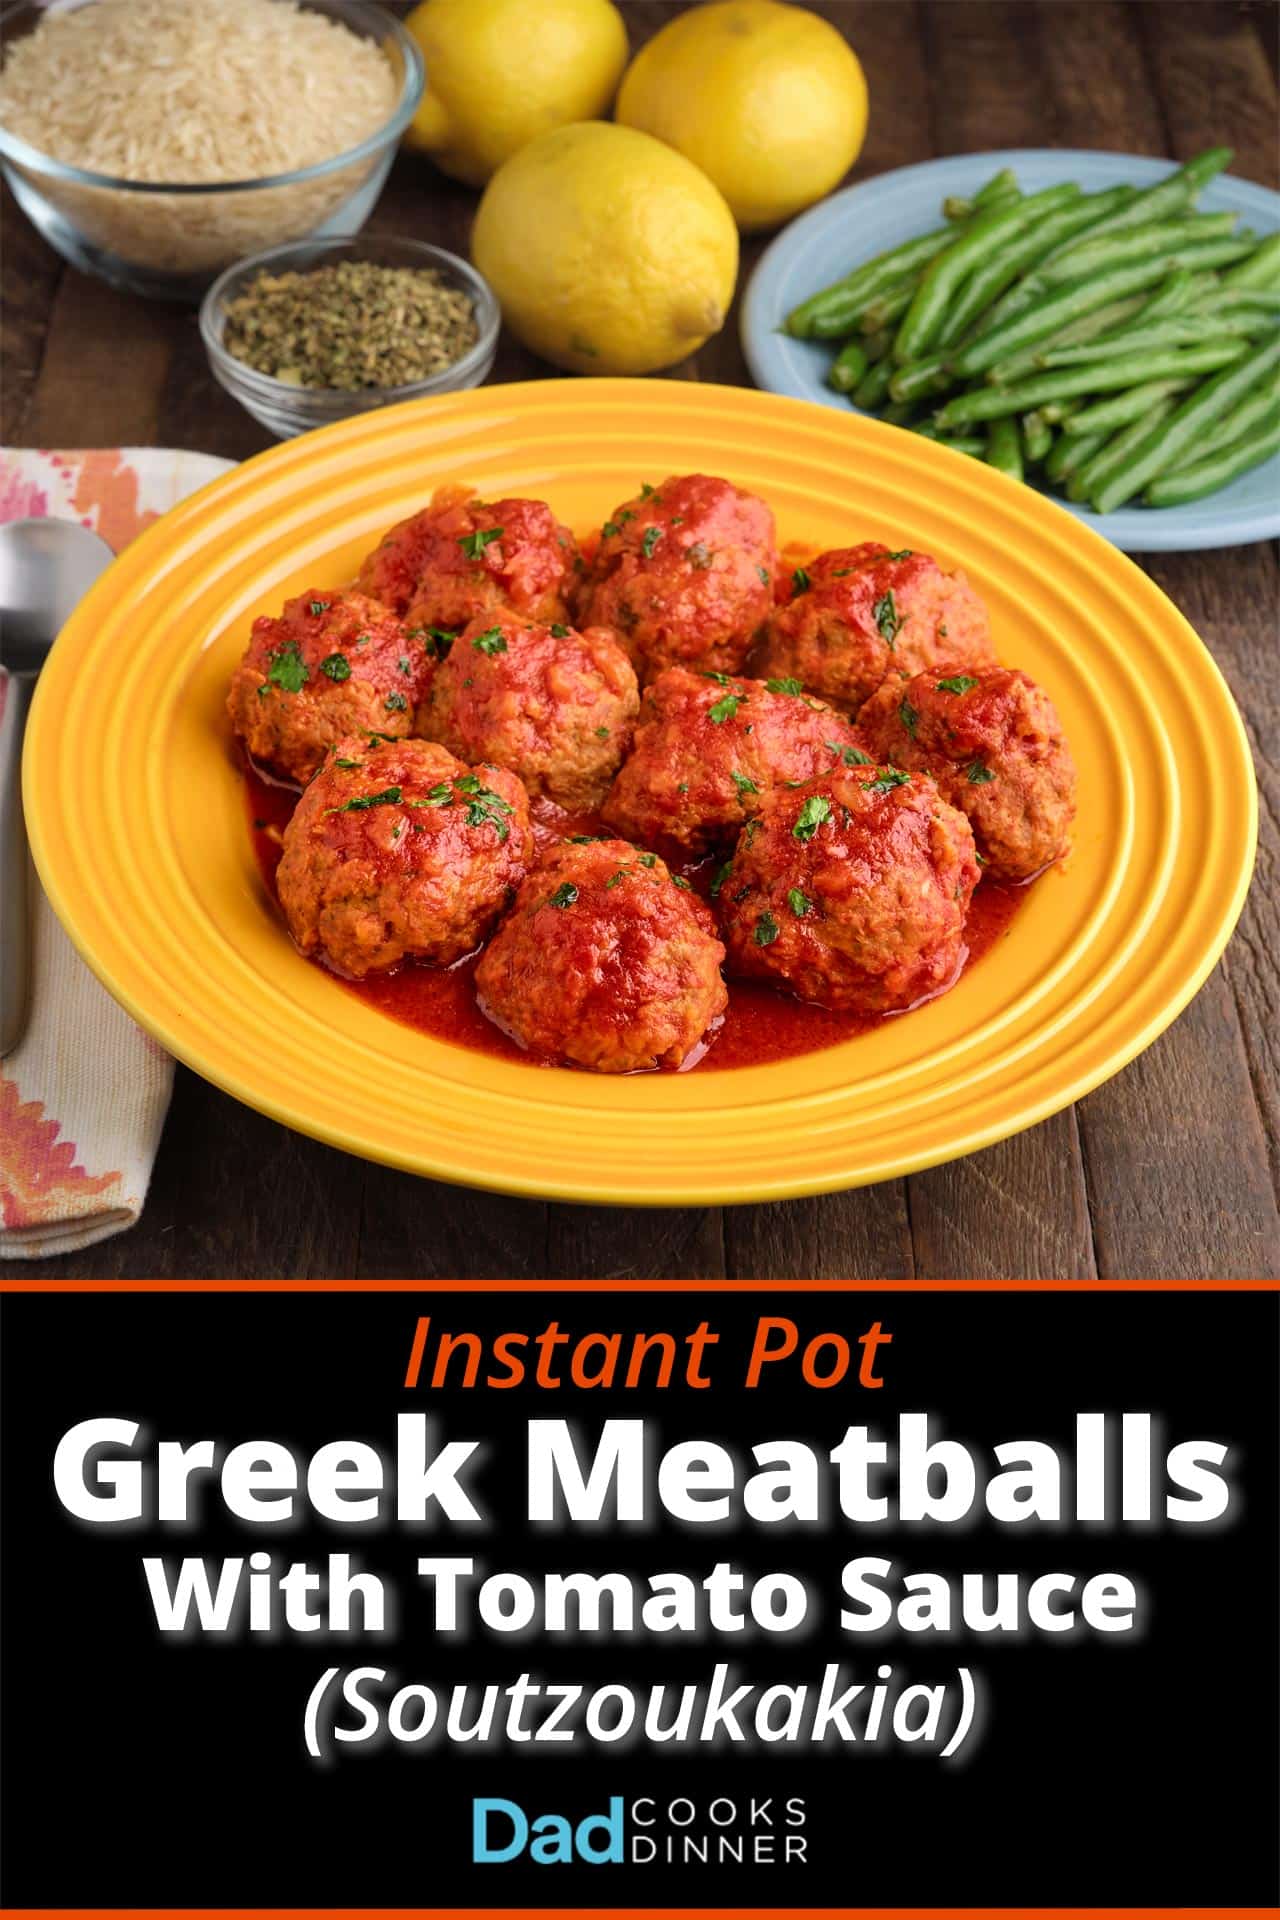 A plate of Greek meatballs in tomato sauce, with green beans, lemons, oregano, and rice in the background